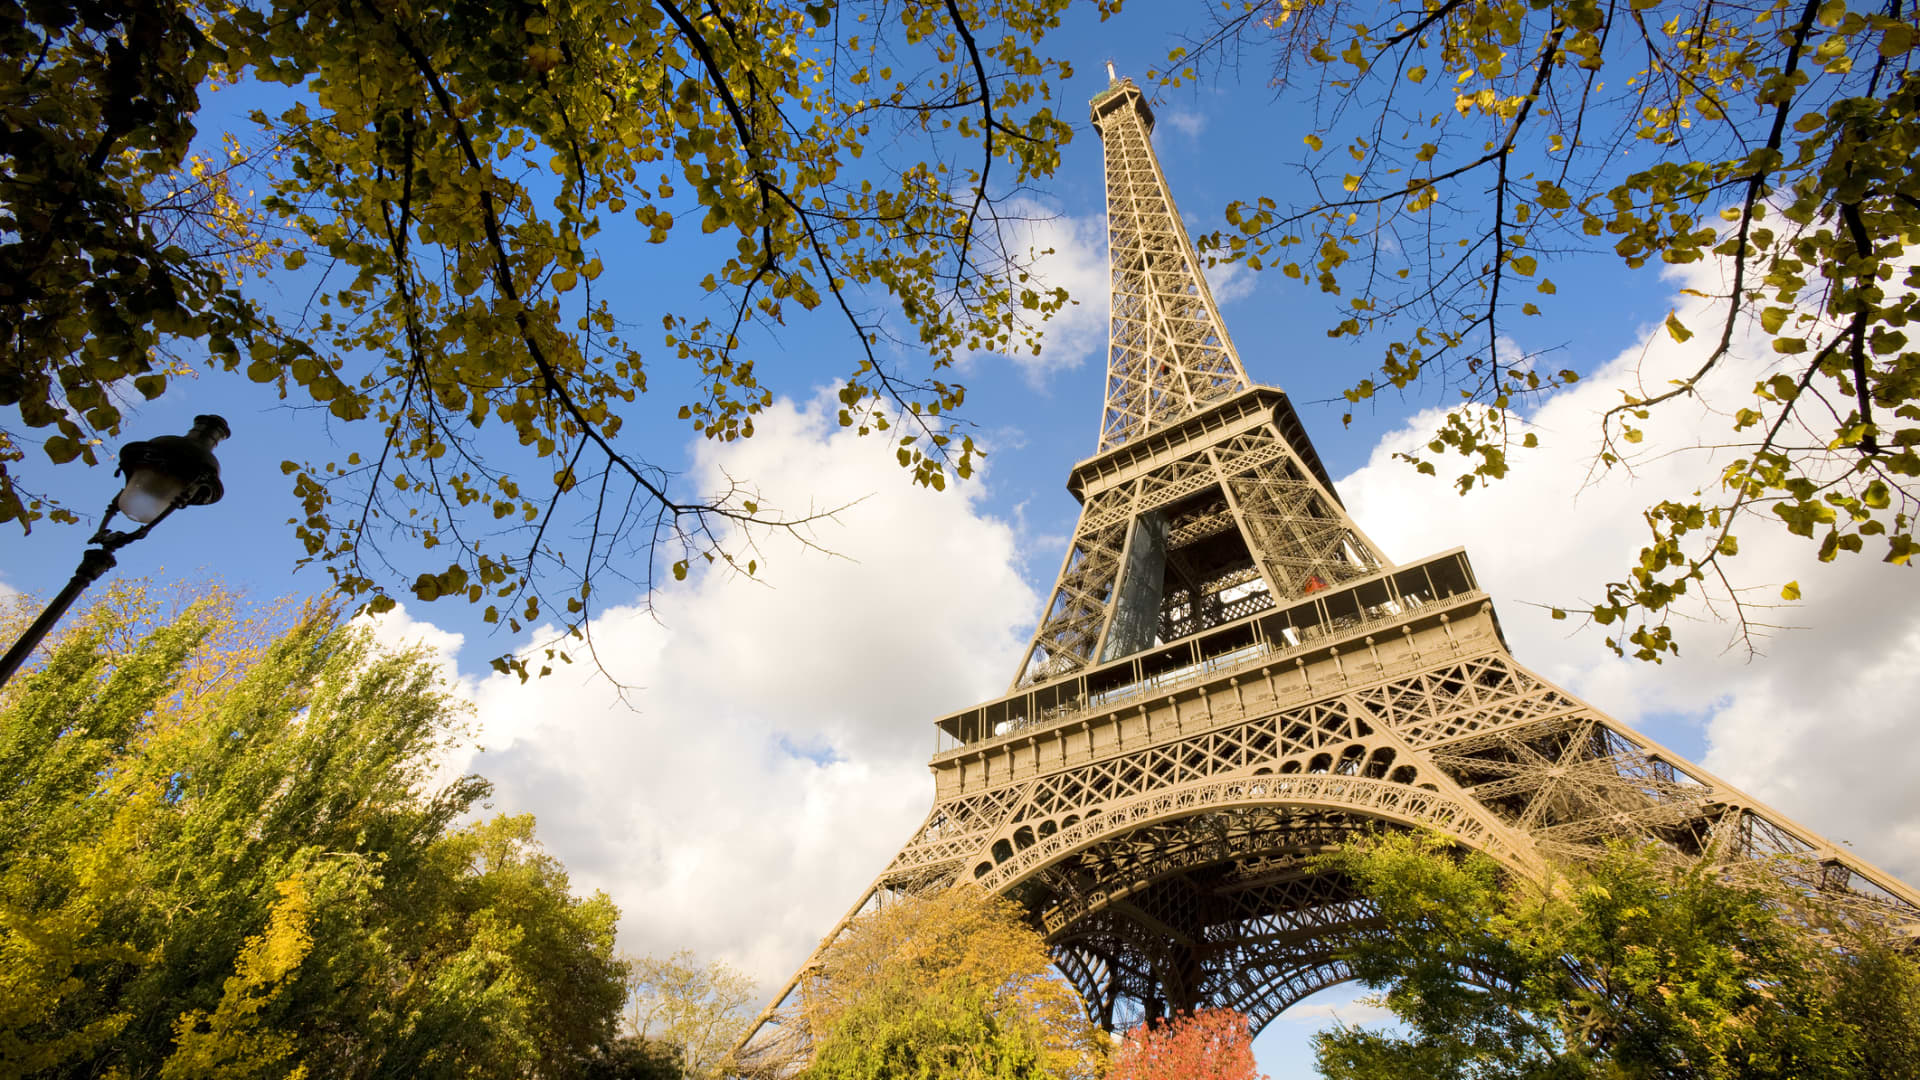 France is one of only five Organization for Economic Co-operation and Development members to collect tax revenue from net wealth. Pictured, the Eiffel Tower in Paris.